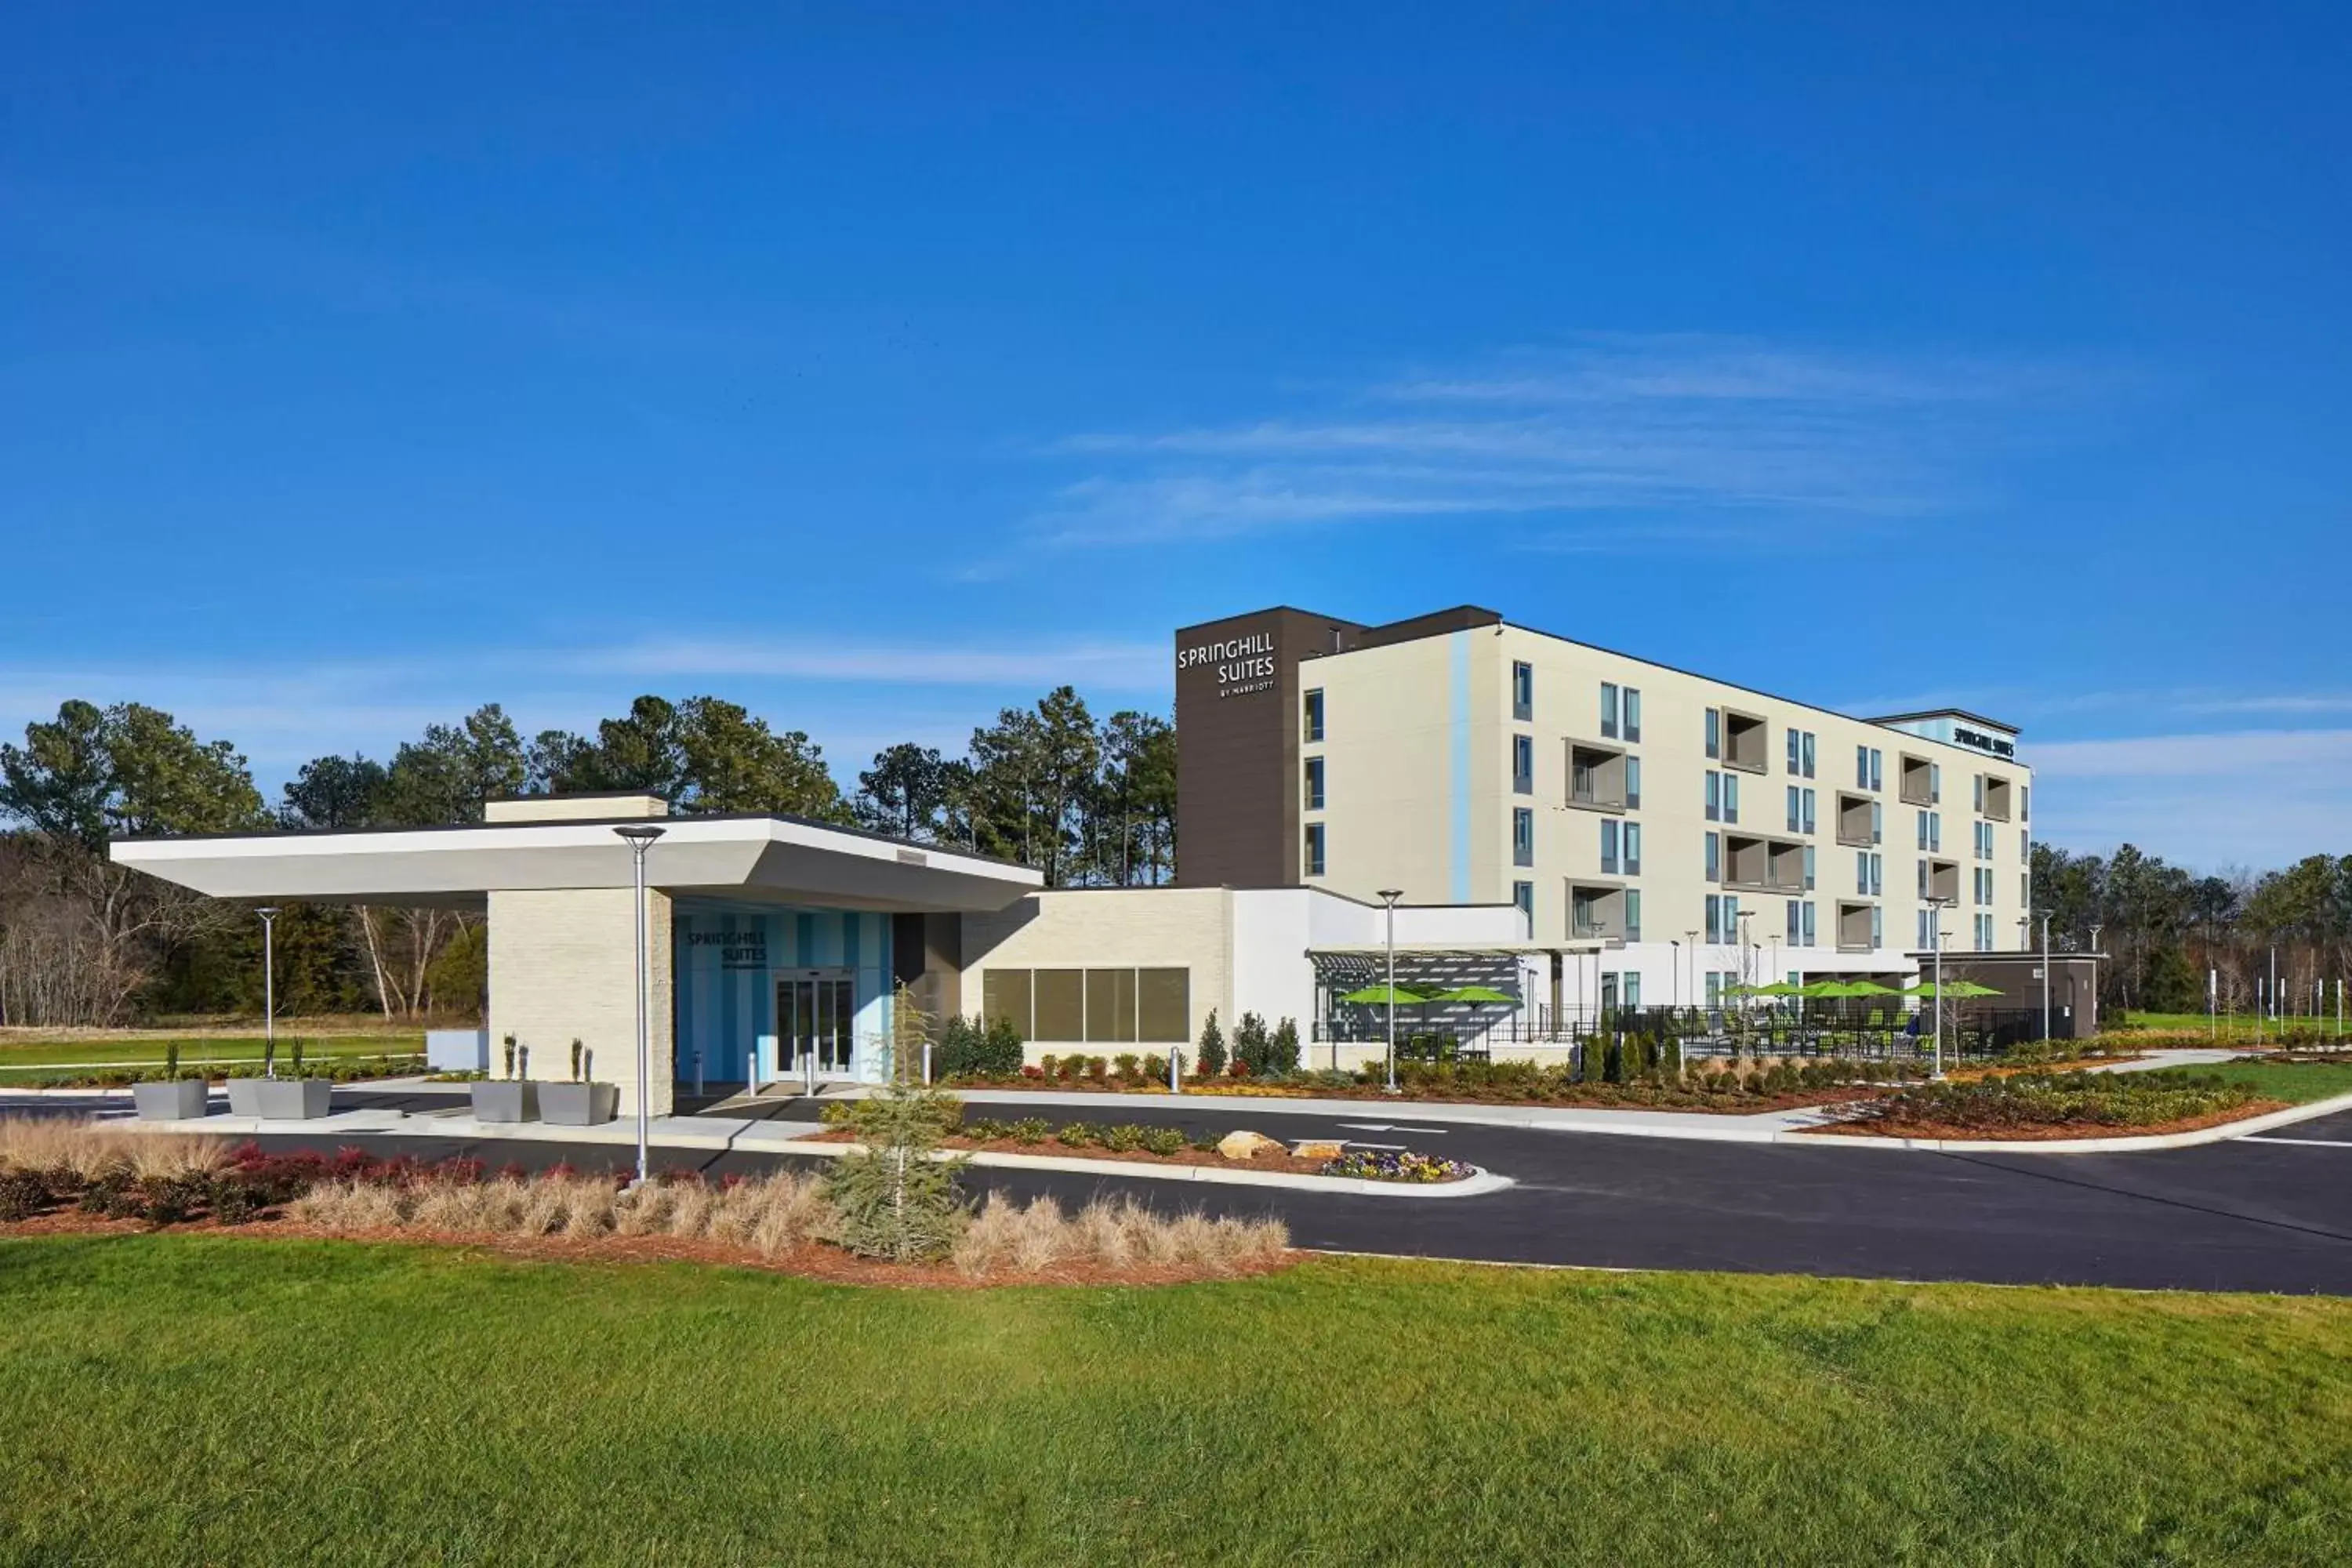 Property Building in SpringHill Suites Charlotte at Carowinds